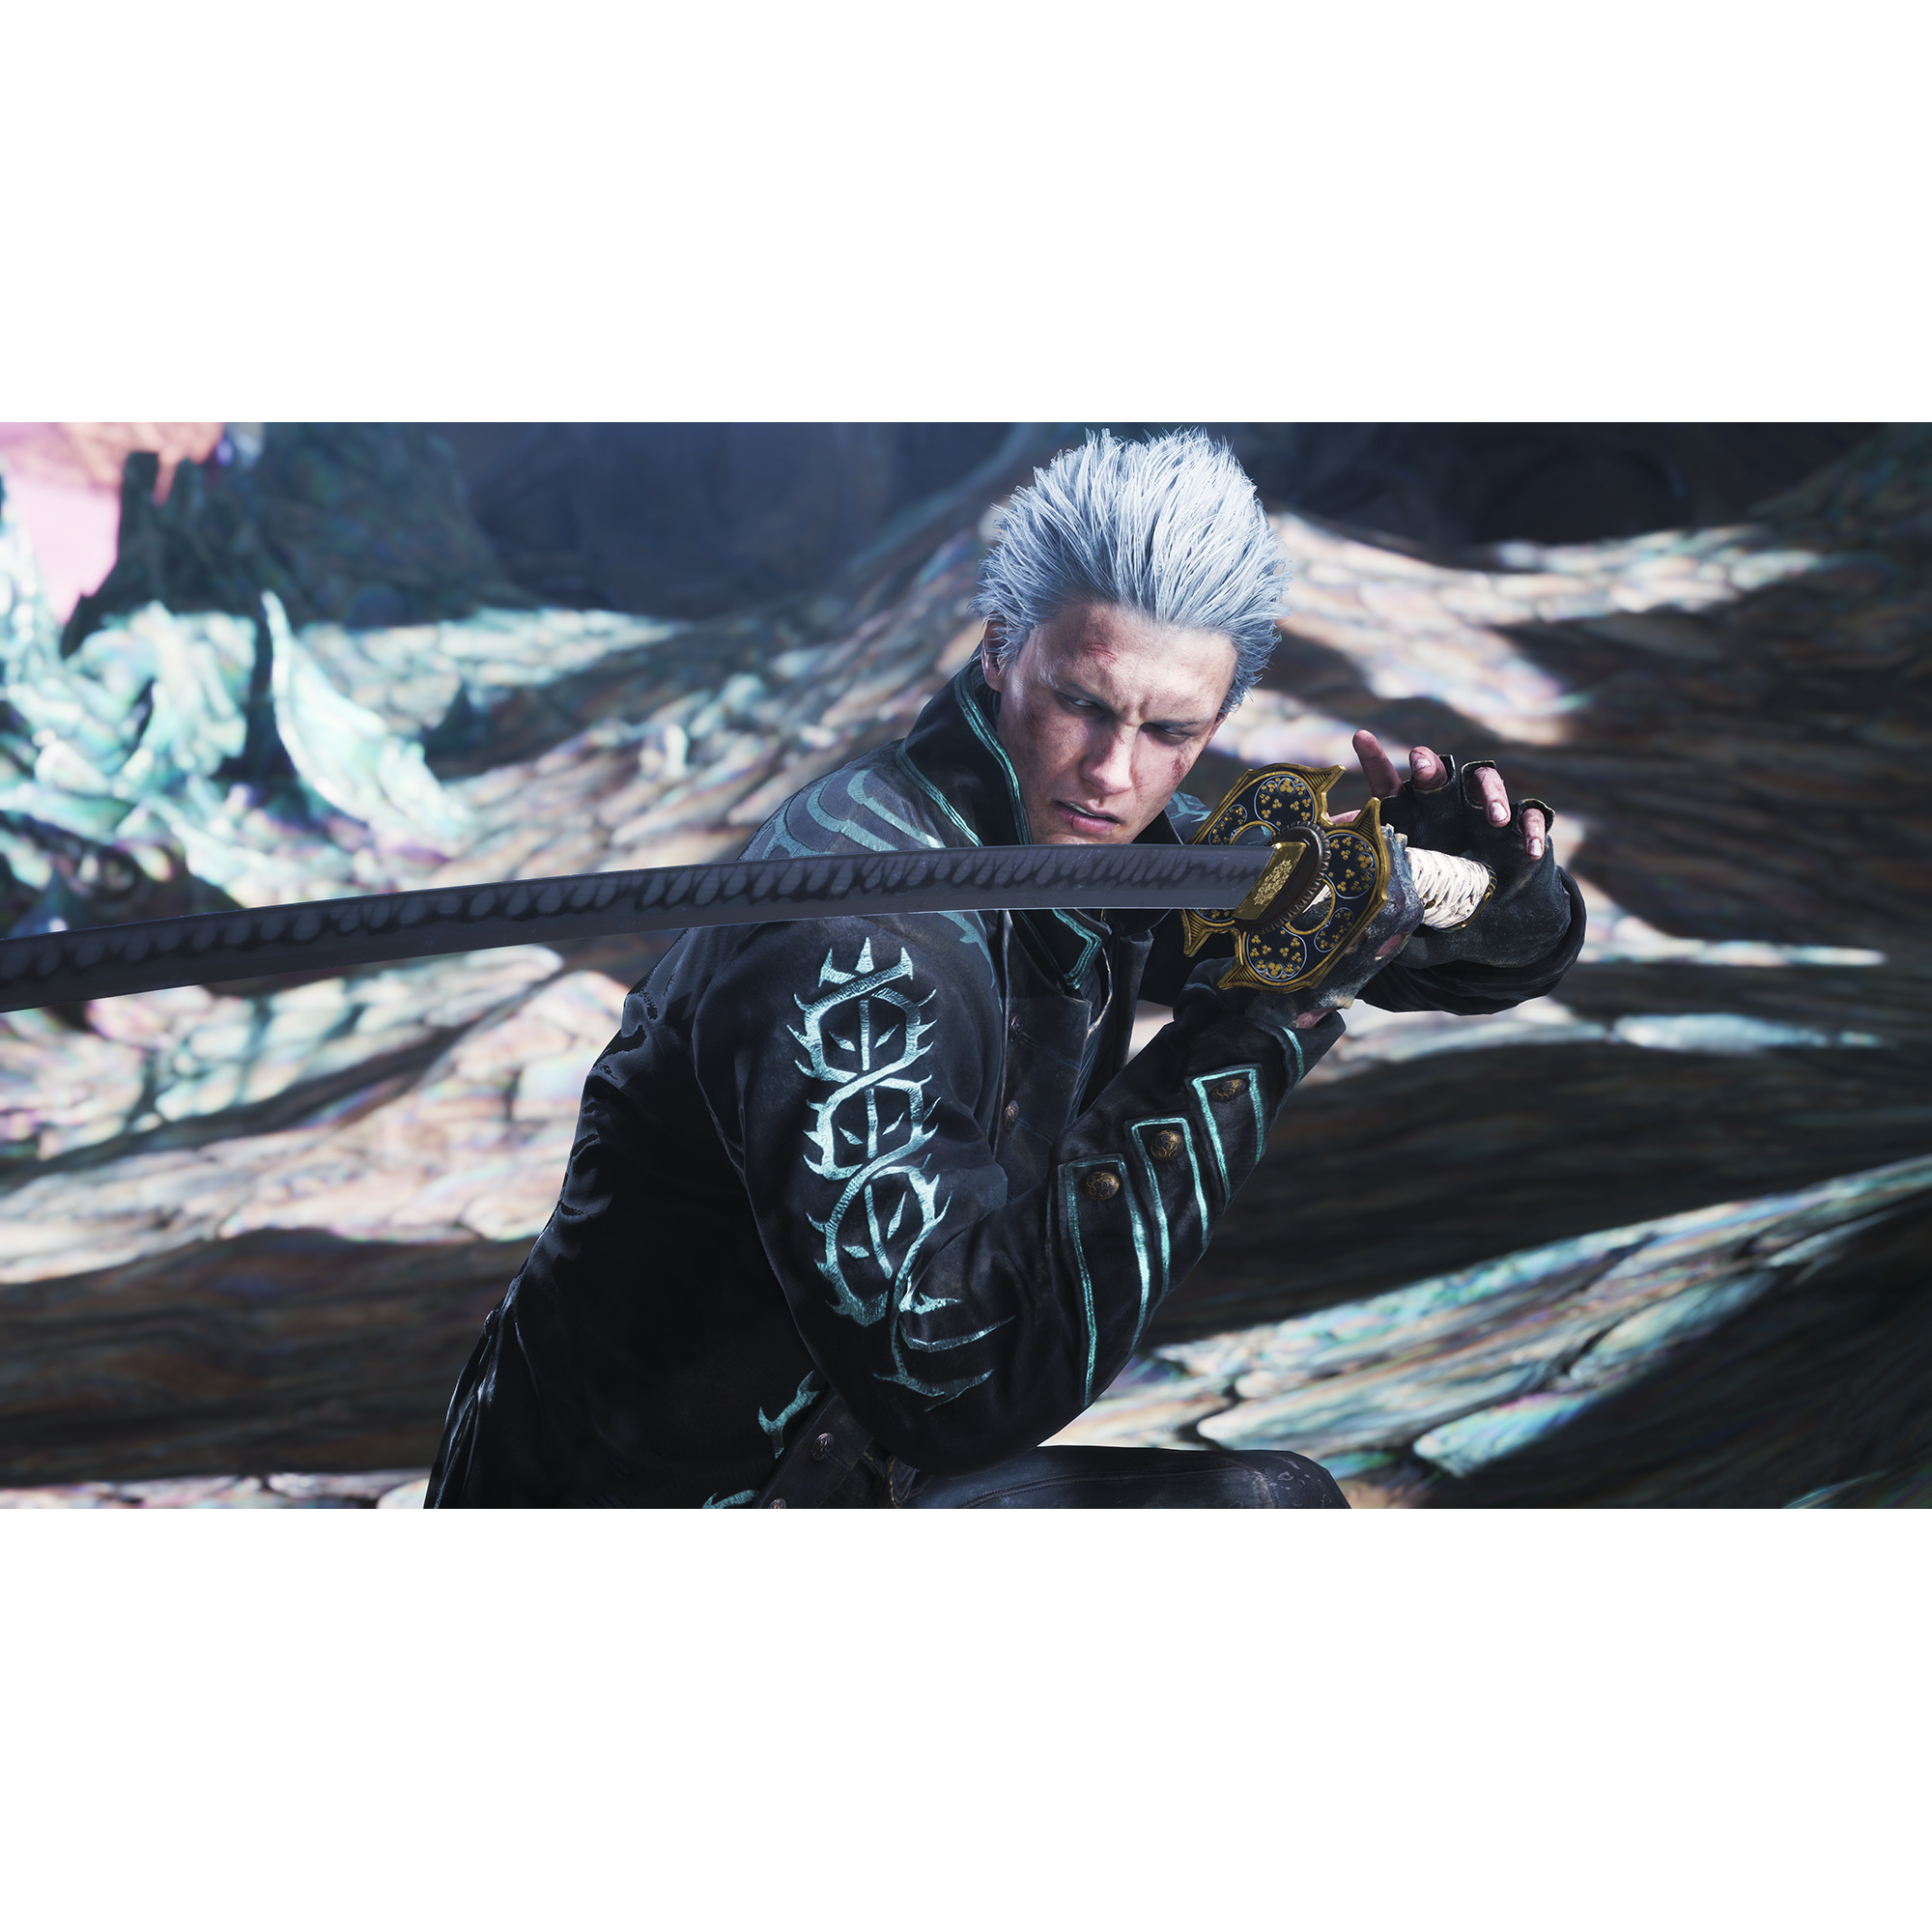 Devil May Cry 5 Special Edition, Capcom, PlayStation 5 - image 3 of 3